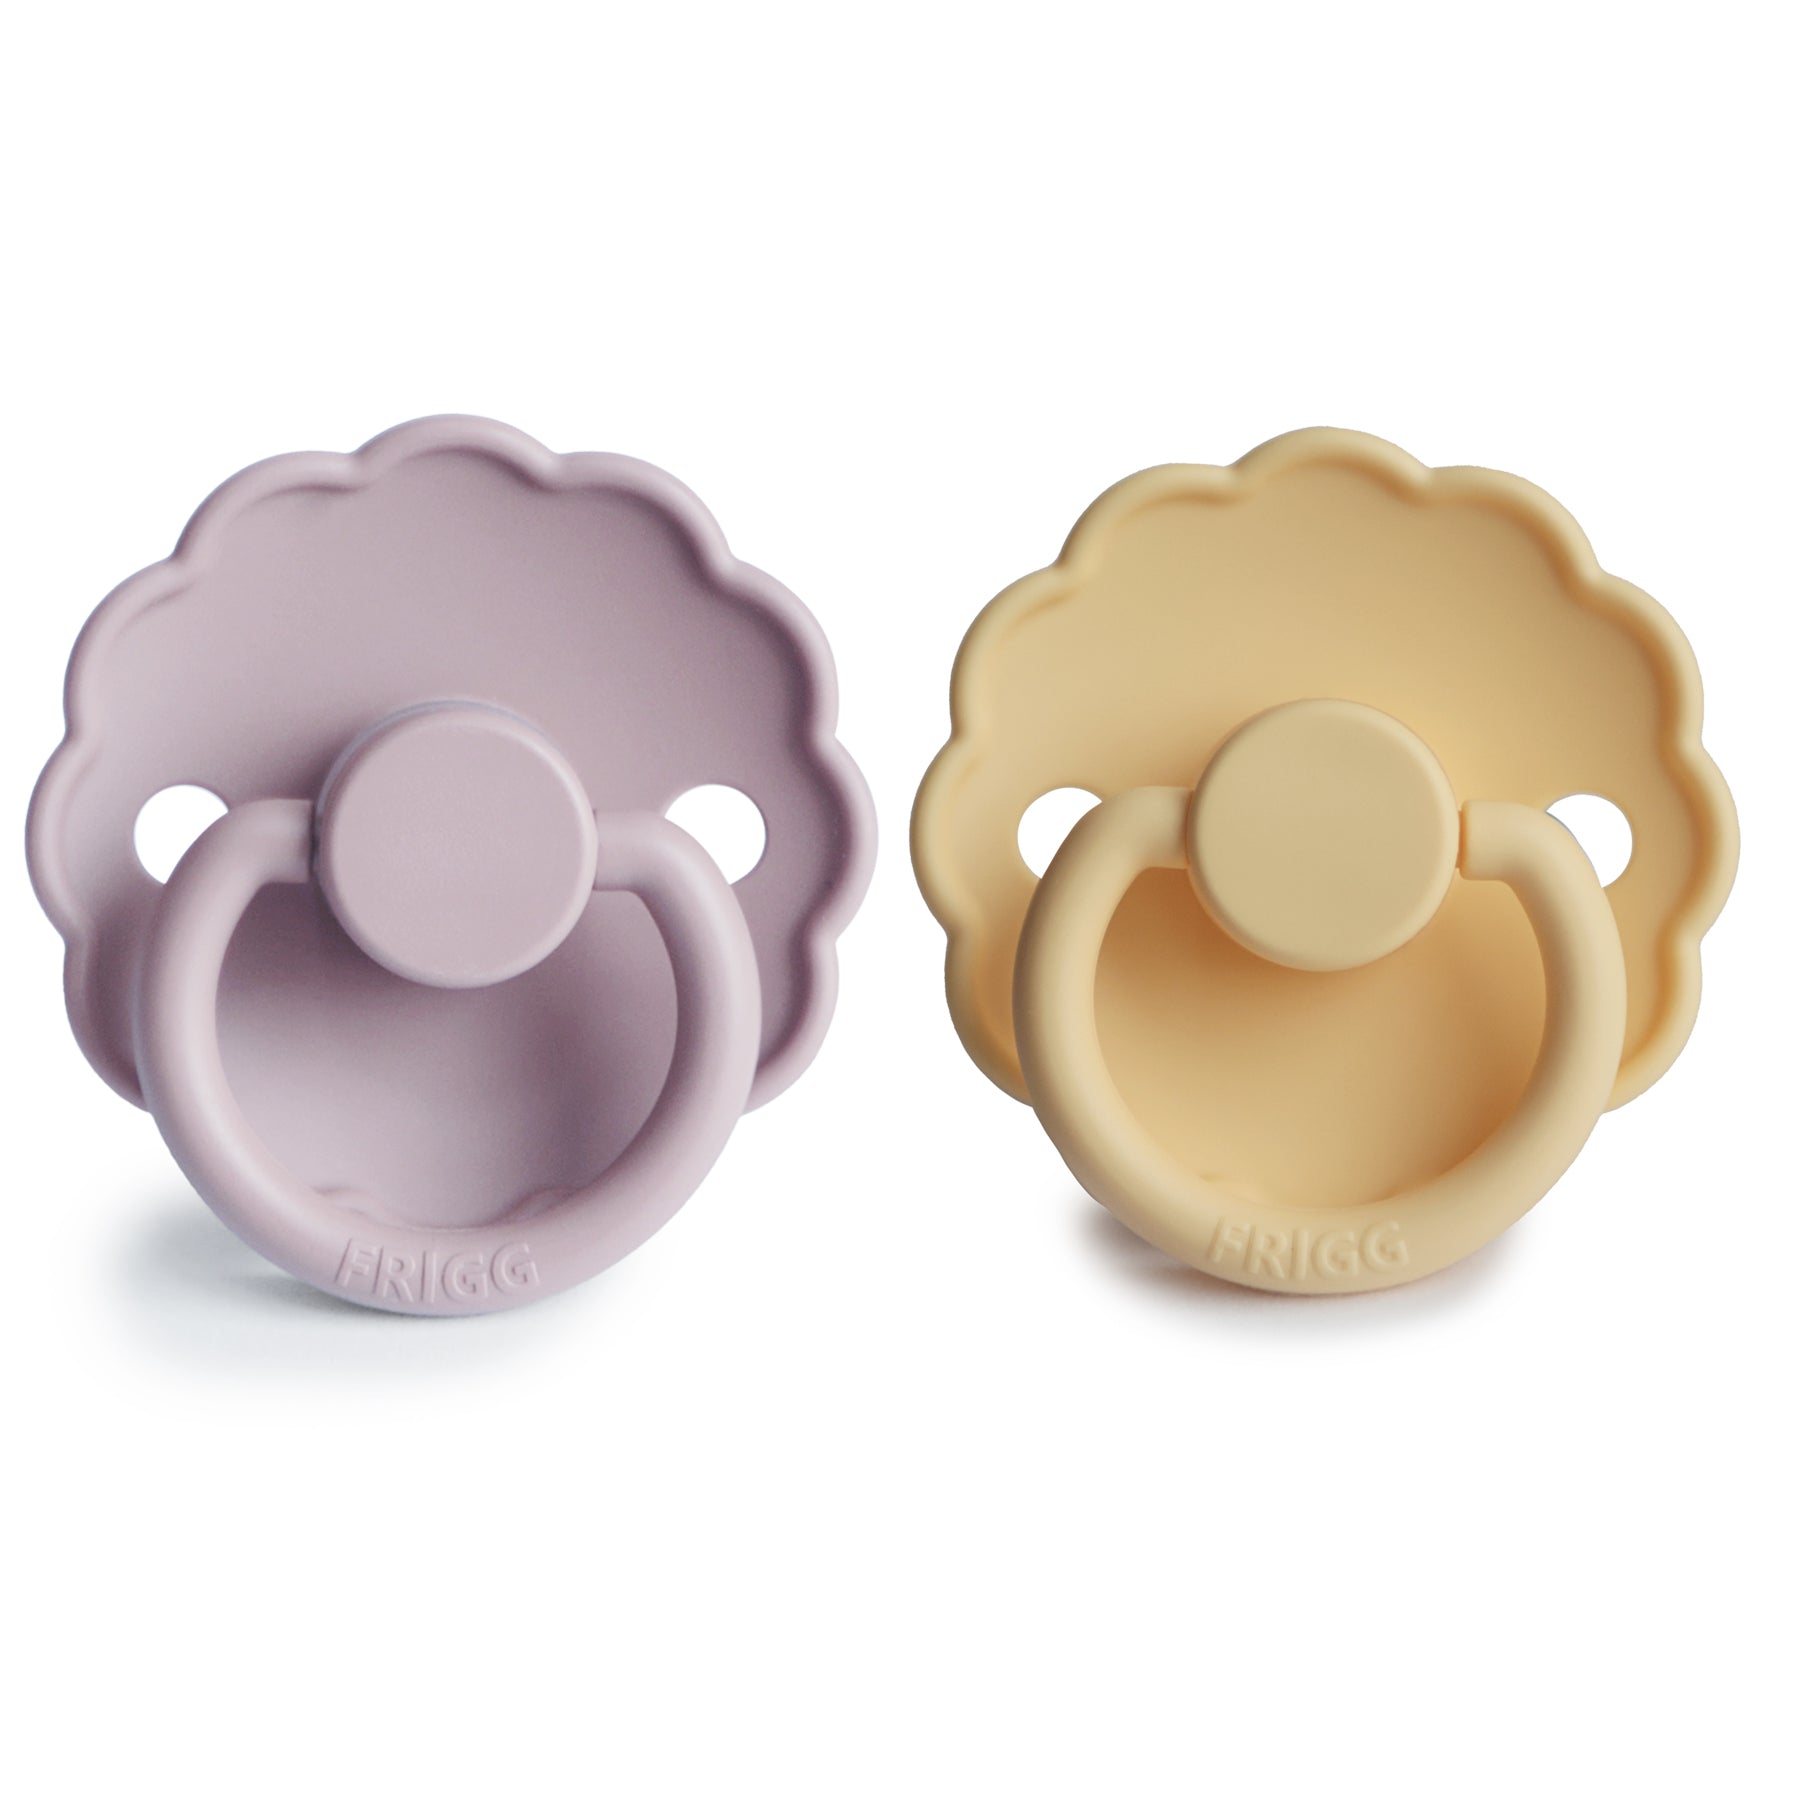 Frigg Daisy Silicone Pacifier - Soft Lilac + Pale Daffodil available at Little Mash Boutique